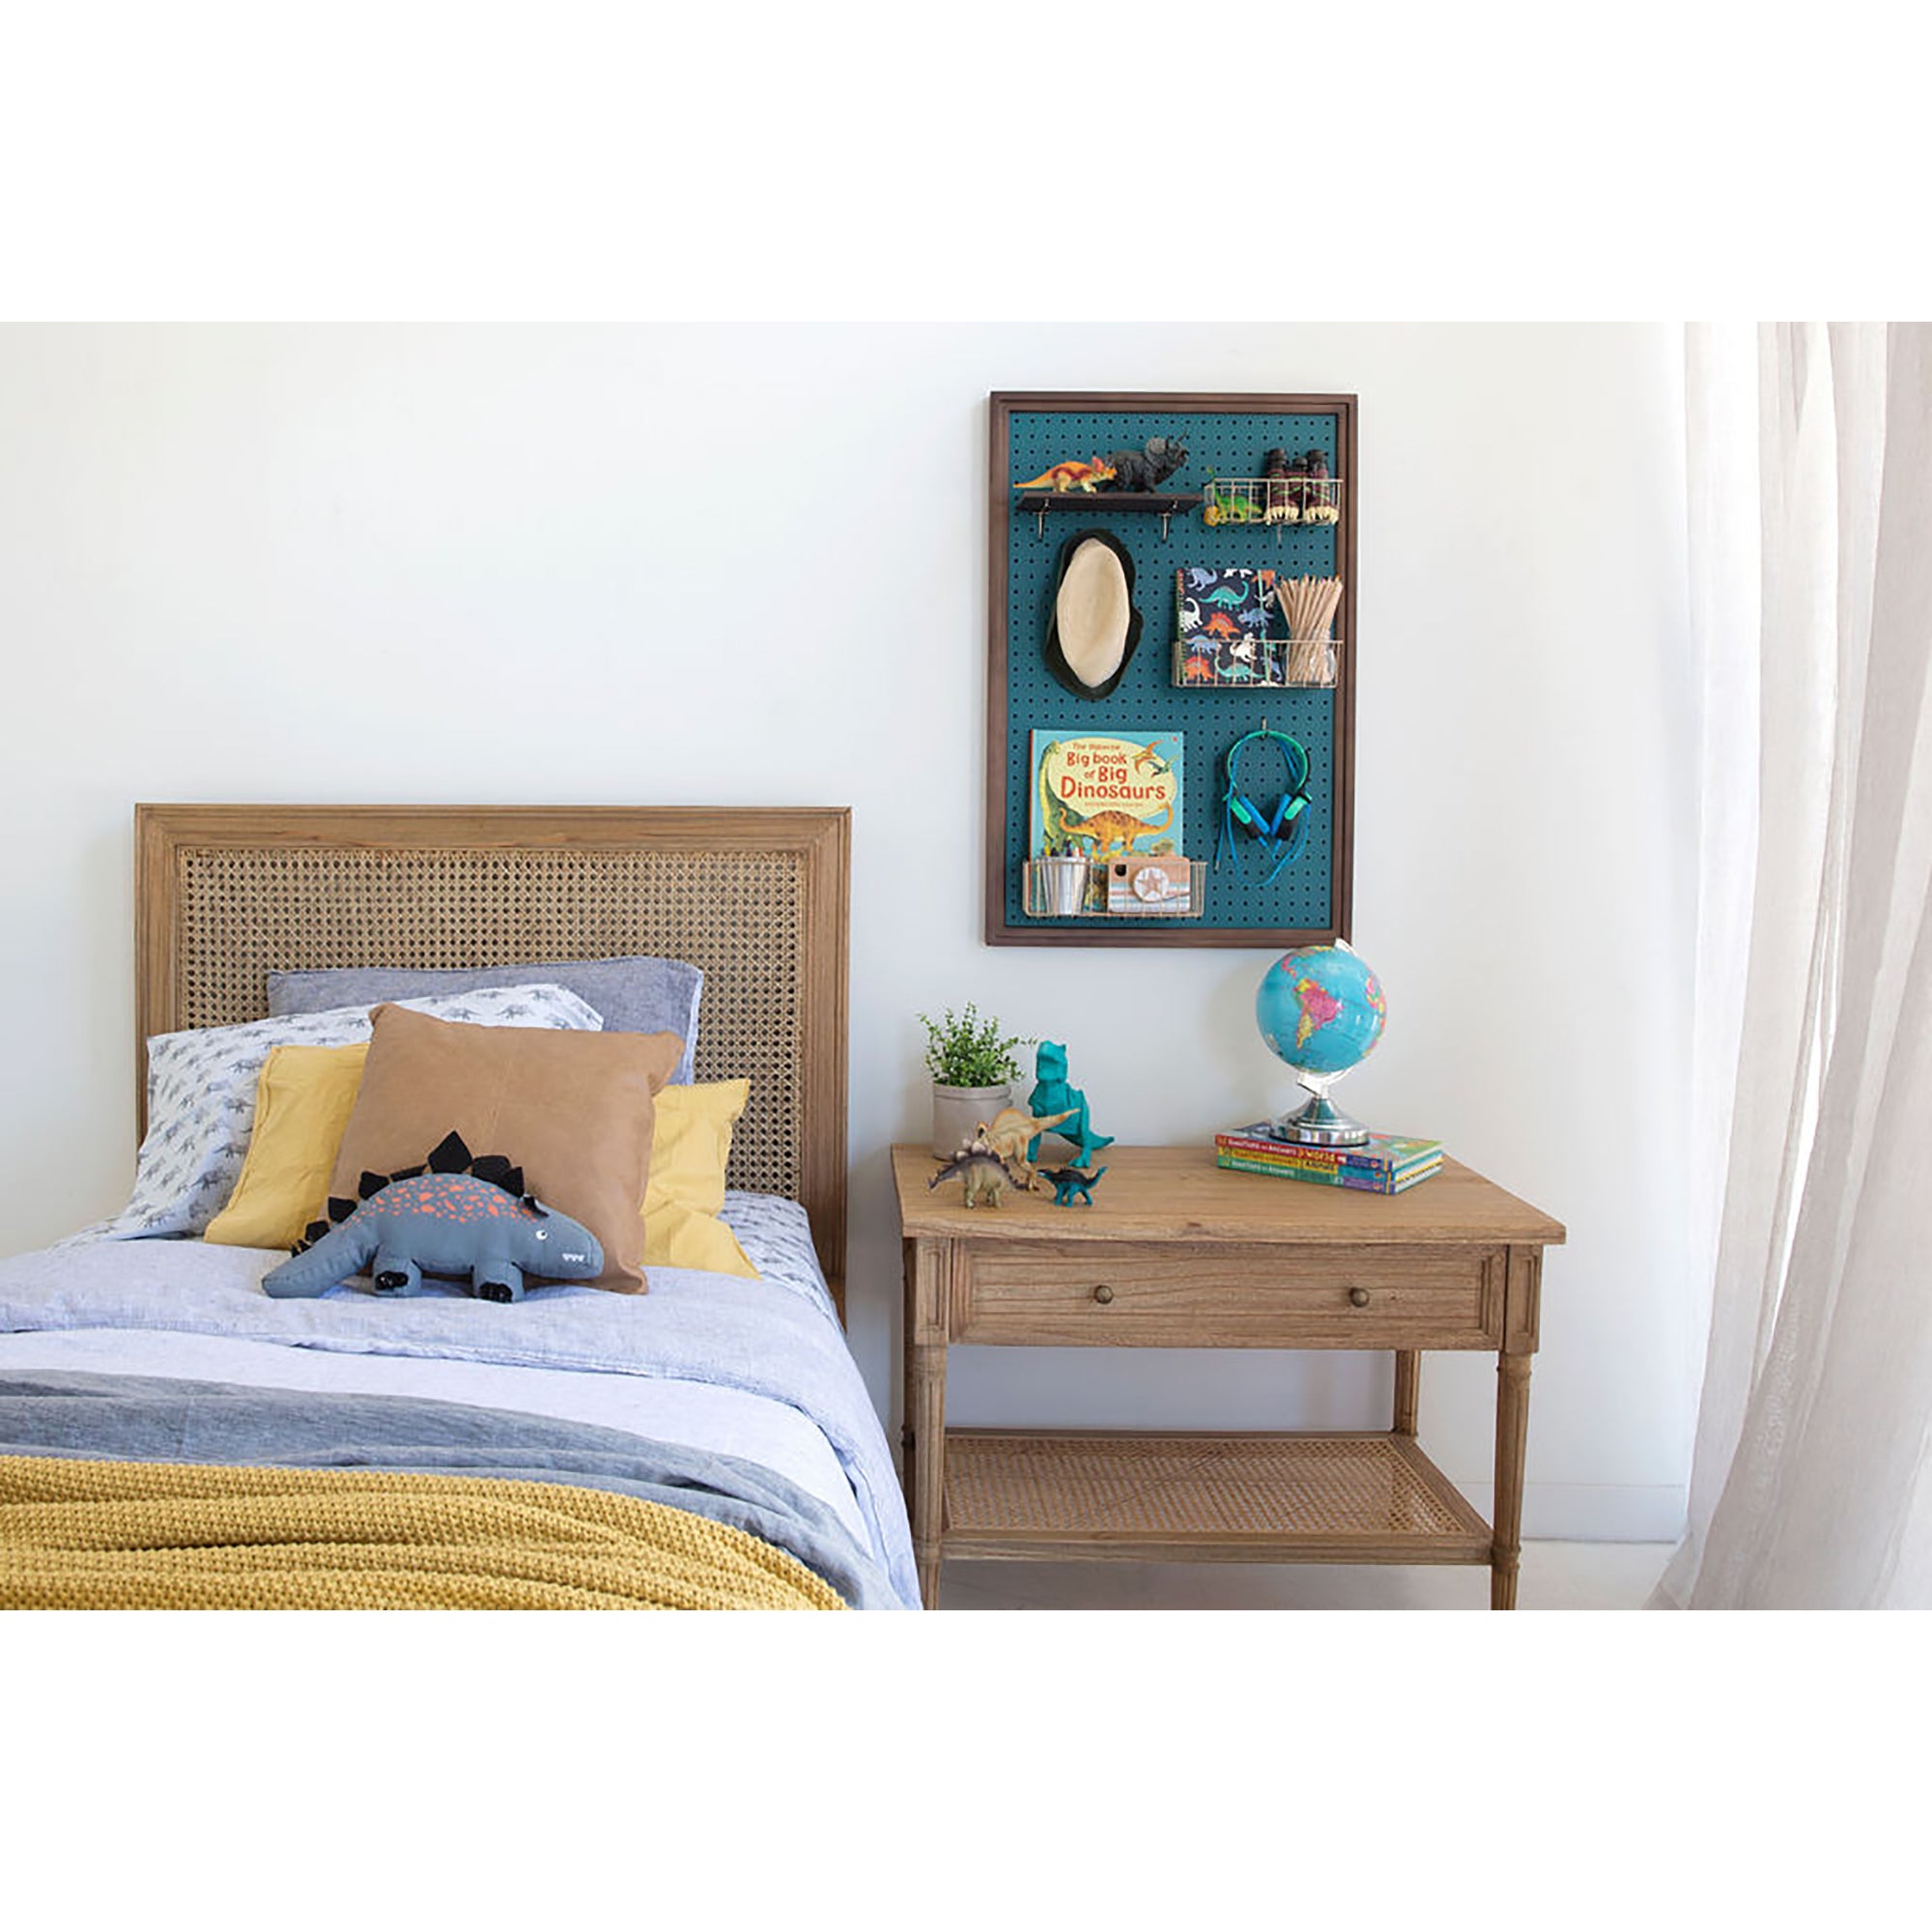 Percy Cane Bed in Weathered Oak – Double - Notbrand